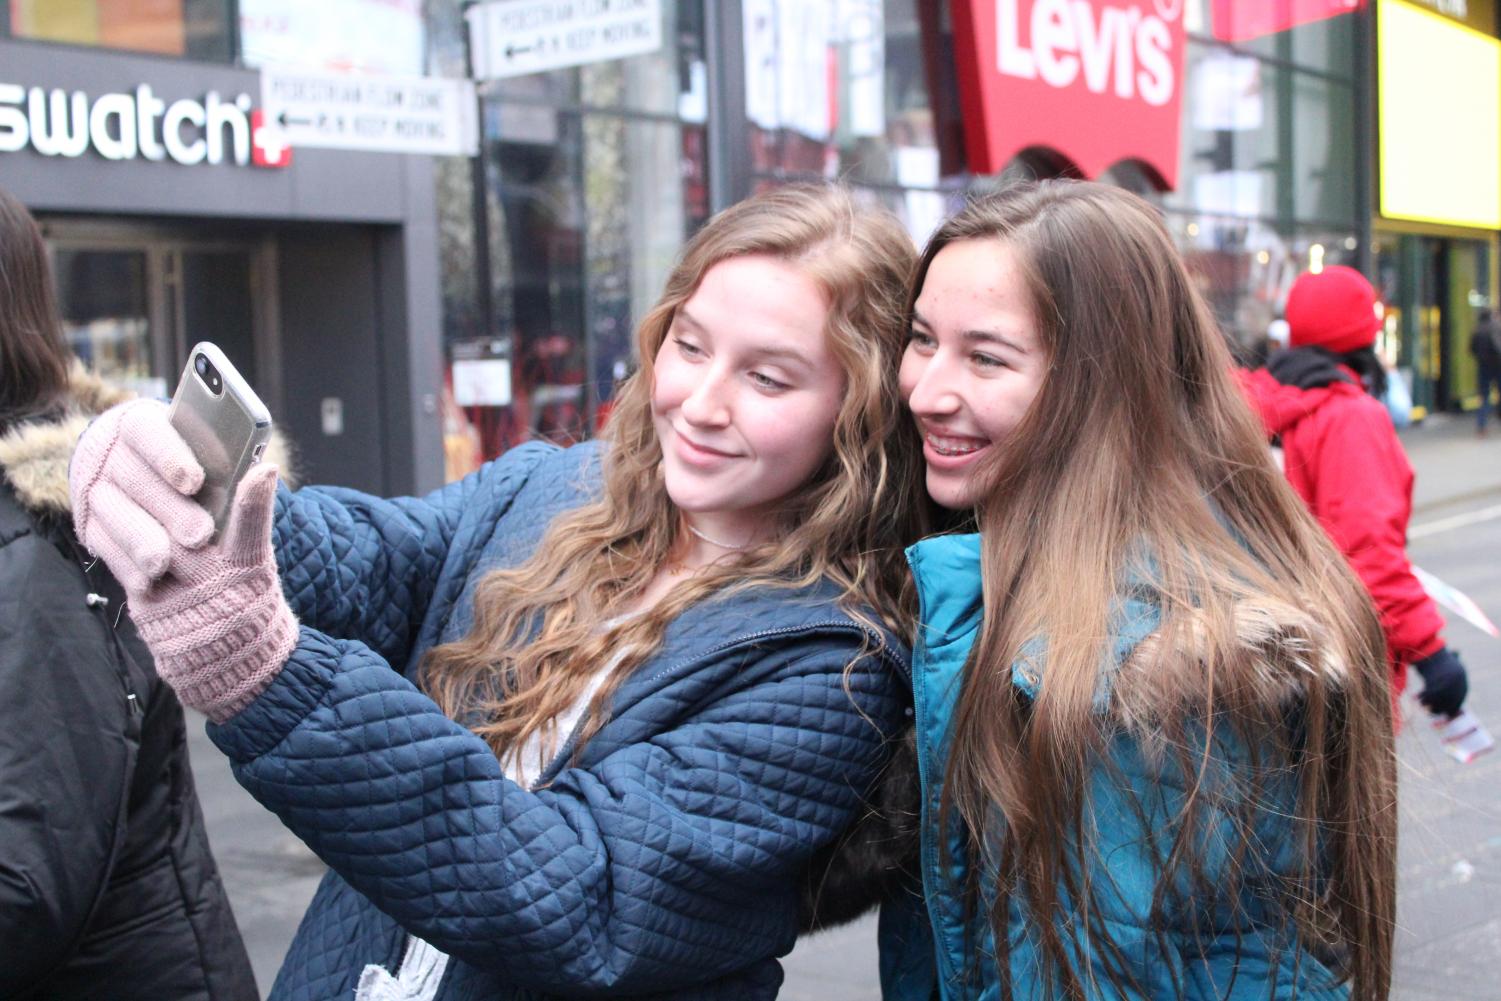 Kaitlyn Gibson and Sydni Segroves pose together for a selfie in Time Square.